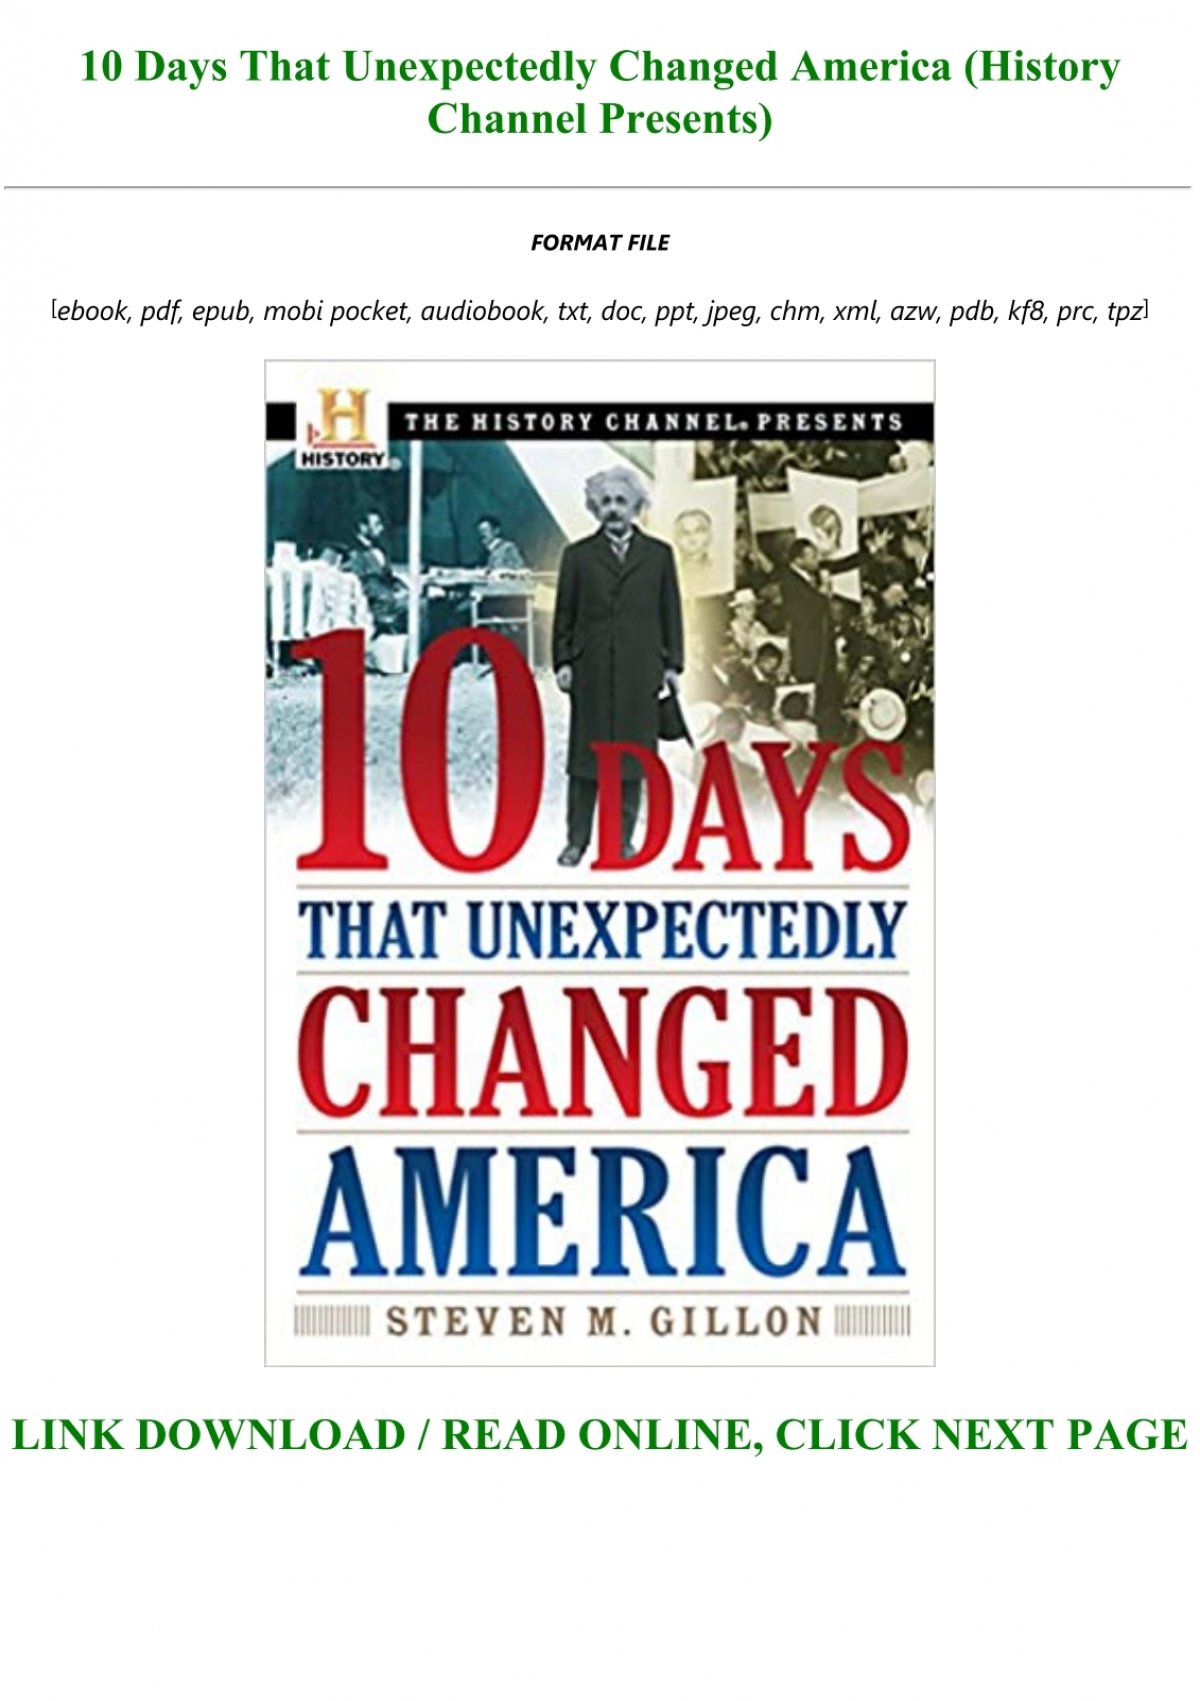 10 Days That Unexpectedly Changed America DVD Set History Channel